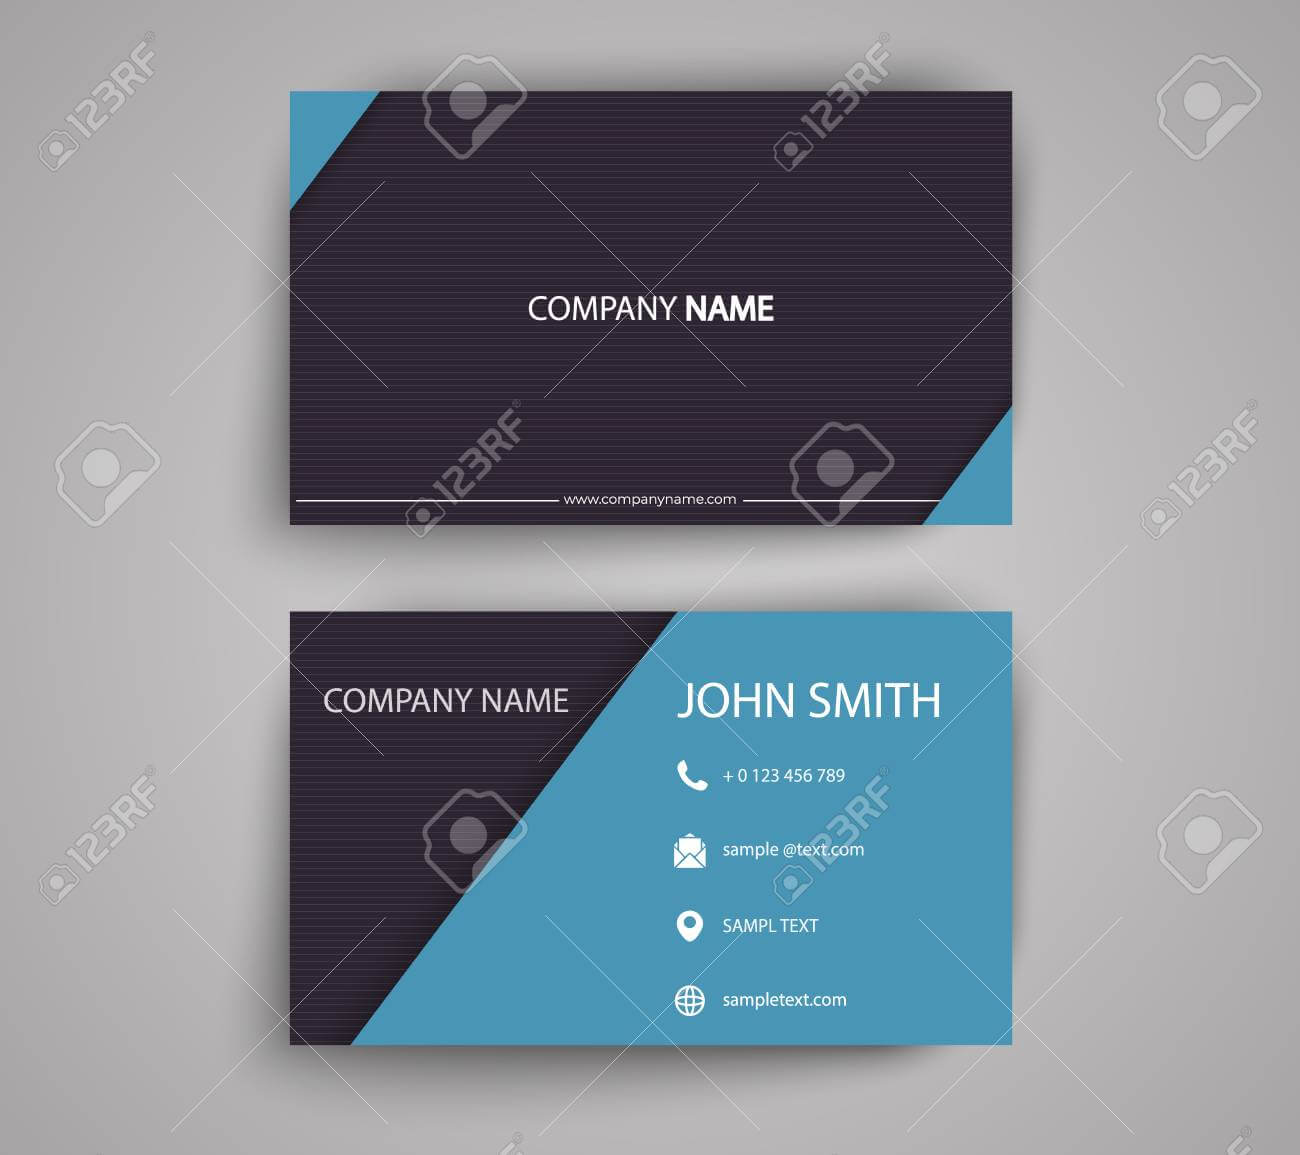 014 Double Sided Business Cards Templates Creative Card Within 2 Sided Business Card Template Word